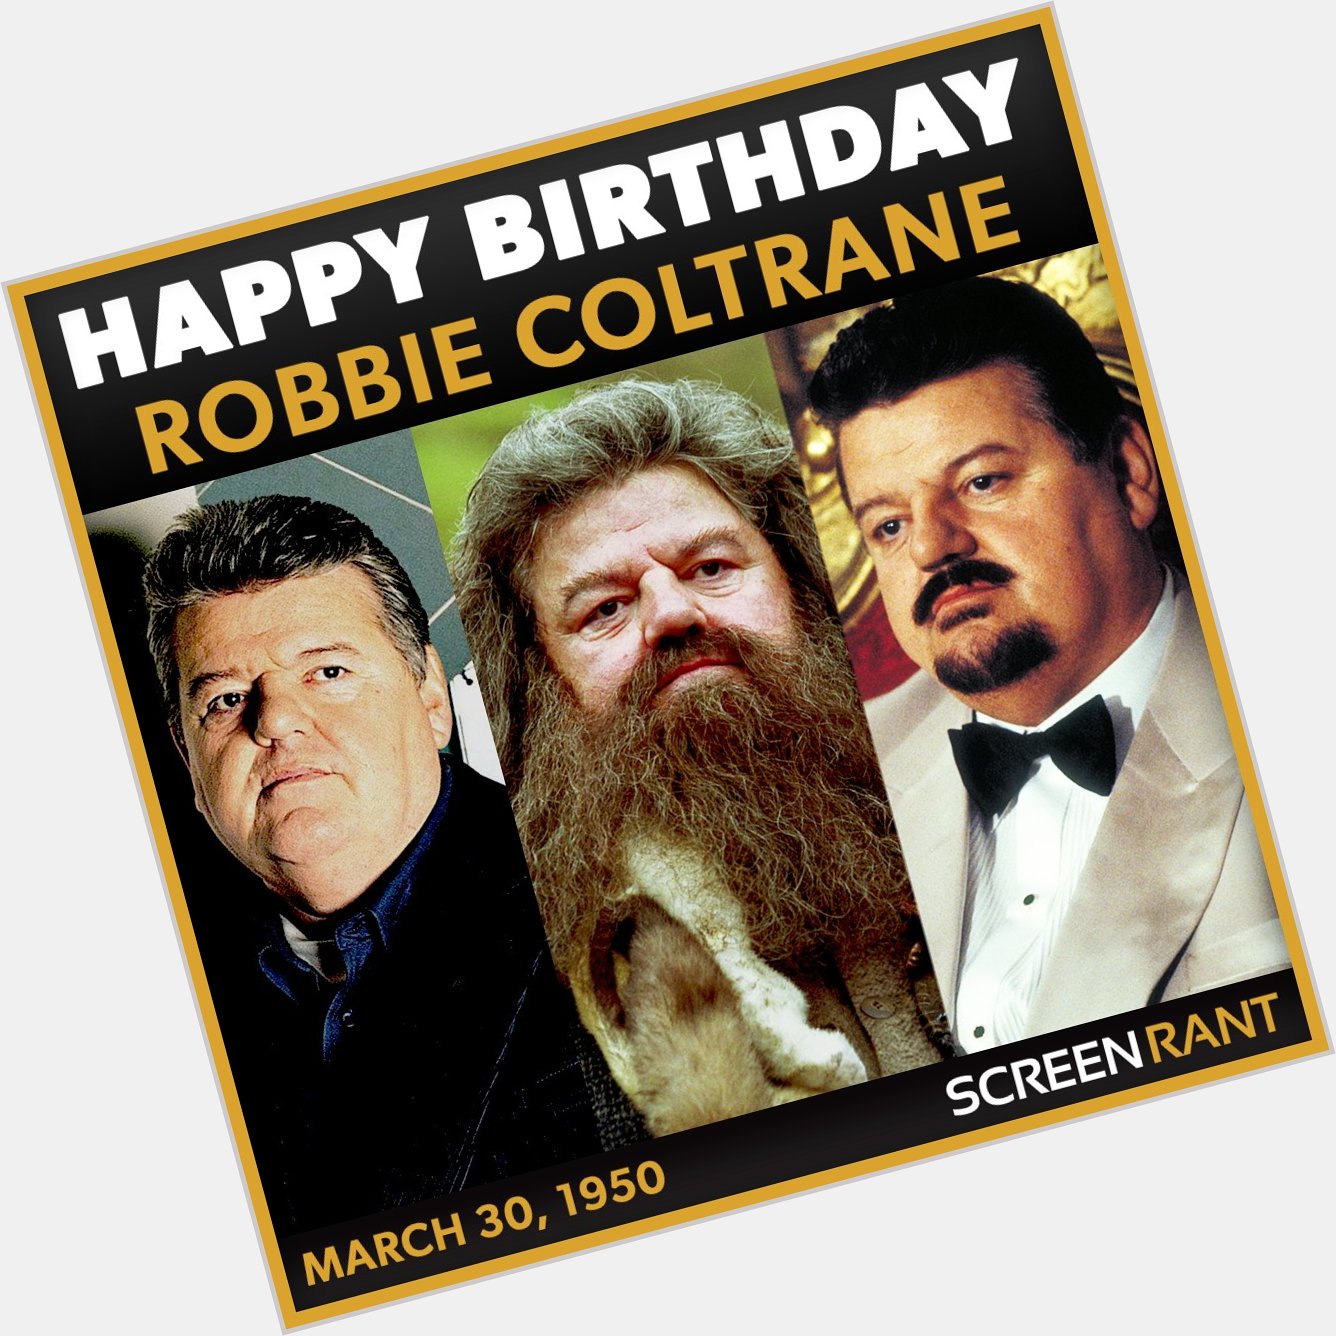 Happy Birthday to the one and only Robbie Coltrane! Share your favorite roles and moments with us! 